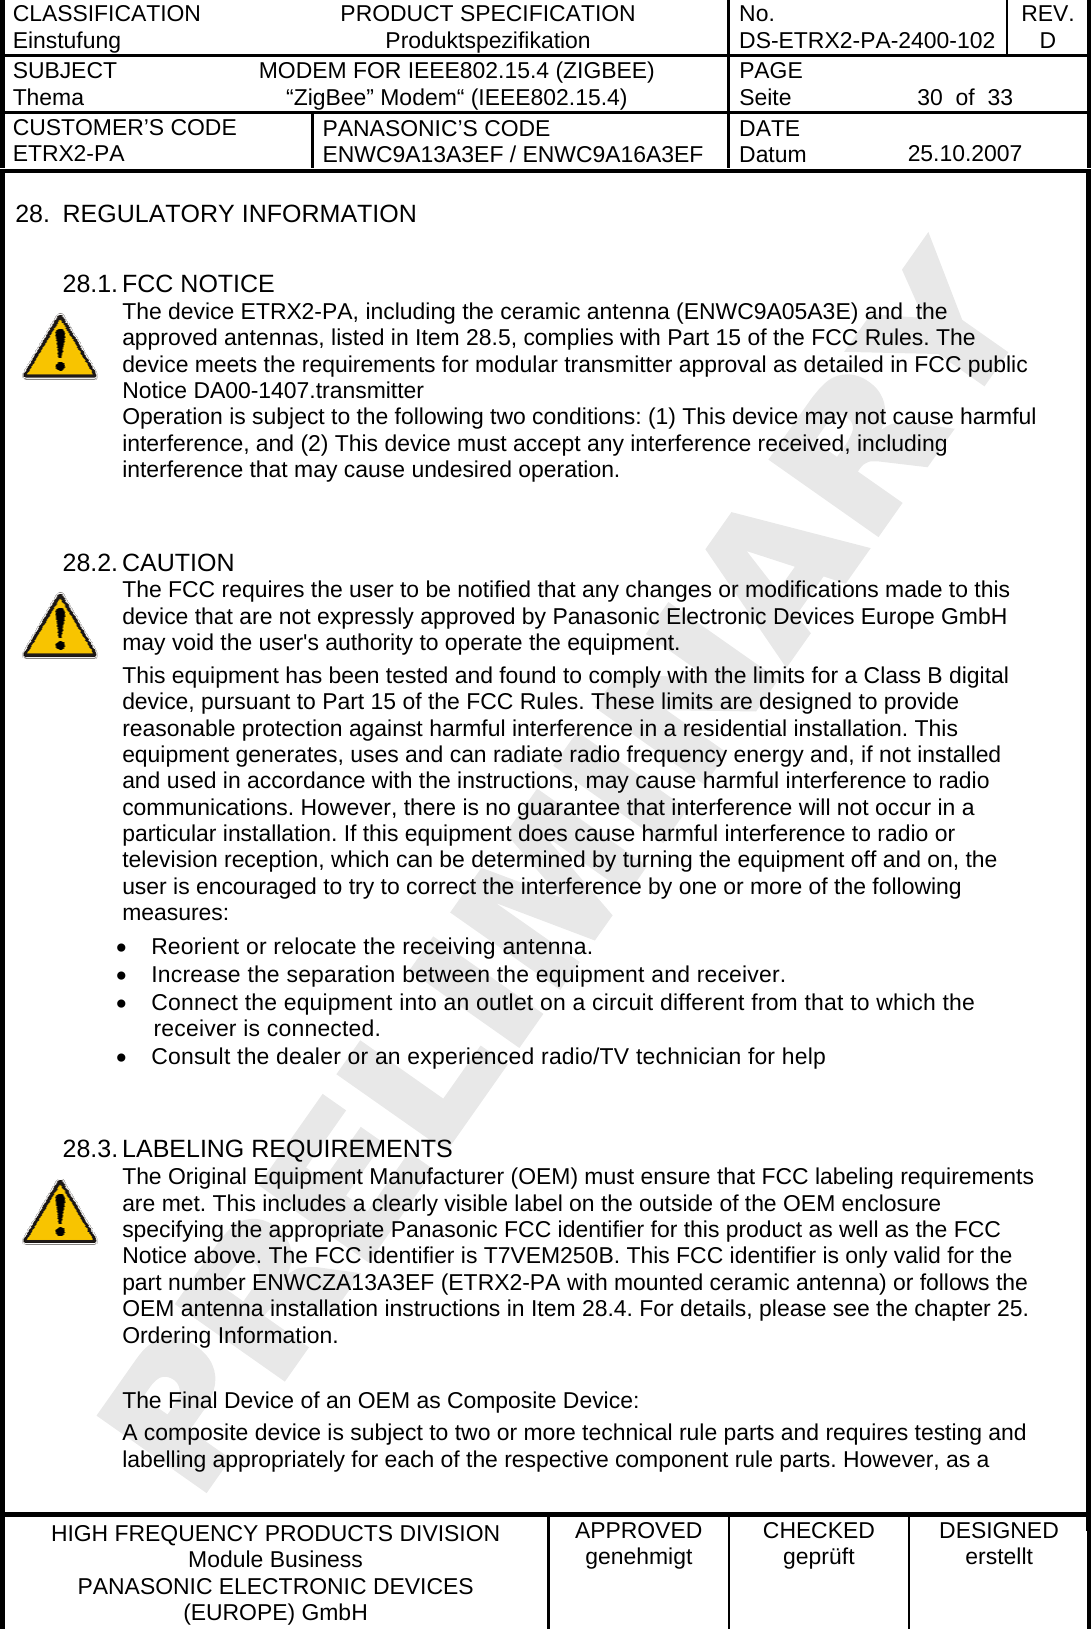 CLASSIFICATION Einstufung  PRODUCT SPECIFICATION Produktspezifikation  No. DS-ETRX2-PA-2400-102 REV.D SUBJECT Thema  MODEM FOR IEEE802.15.4 (ZIGBEE) “ZigBee” Modem“ (IEEE802.15.4)    PAGE Seite   30  of  33 CUSTOMER’S CODE ETRX2-PA  PANASONIC’S CODE ENWC9A13A3EF / ENWC9A16A3EF  DATE Datum   25.10.2007   HIGH FREQUENCY PRODUCTS DIVISION Module Business PANASONIC ELECTRONIC DEVICES  (EUROPE) GmbH APPROVED genehmigt  CHECKED geprüft  DESIGNED erstellt 28. REGULATORY INFORMATION  28.1. FCC NOTICE The device ETRX2-PA, including the ceramic antenna (ENWC9A05A3E) and  the approved antennas, listed in Item 28.5, complies with Part 15 of the FCC Rules. The device meets the requirements for modular transmitter approval as detailed in FCC public Notice DA00-1407.transmitter  Operation is subject to the following two conditions: (1) This device may not cause harmful interference, and (2) This device must accept any interference received, including interference that may cause undesired operation.   28.2. CAUTION The FCC requires the user to be notified that any changes or modifications made to this device that are not expressly approved by Panasonic Electronic Devices Europe GmbH may void the user&apos;s authority to operate the equipment. This equipment has been tested and found to comply with the limits for a Class B digital device, pursuant to Part 15 of the FCC Rules. These limits are designed to provide reasonable protection against harmful interference in a residential installation. This equipment generates, uses and can radiate radio frequency energy and, if not installed and used in accordance with the instructions, may cause harmful interference to radio communications. However, there is no guarantee that interference will not occur in a particular installation. If this equipment does cause harmful interference to radio or television reception, which can be determined by turning the equipment off and on, the user is encouraged to try to correct the interference by one or more of the following measures: •  Reorient or relocate the receiving antenna. •  Increase the separation between the equipment and receiver. •  Connect the equipment into an outlet on a circuit different from that to which the receiver is connected. •  Consult the dealer or an experienced radio/TV technician for help   28.3. LABELING REQUIREMENTS The Original Equipment Manufacturer (OEM) must ensure that FCC labeling requirements are met. This includes a clearly visible label on the outside of the OEM enclosure specifying the appropriate Panasonic FCC identifier for this product as well as the FCC Notice above. The FCC identifier is T7VEM250B. This FCC identifier is only valid for the part number ENWCZA13A3EF (ETRX2-PA with mounted ceramic antenna) or follows the OEM antenna installation instructions in Item 28.4. For details, please see the chapter 25. Ordering Information.  The Final Device of an OEM as Composite Device: A composite device is subject to two or more technical rule parts and requires testing and labelling appropriately for each of the respective component rule parts. However, as a  